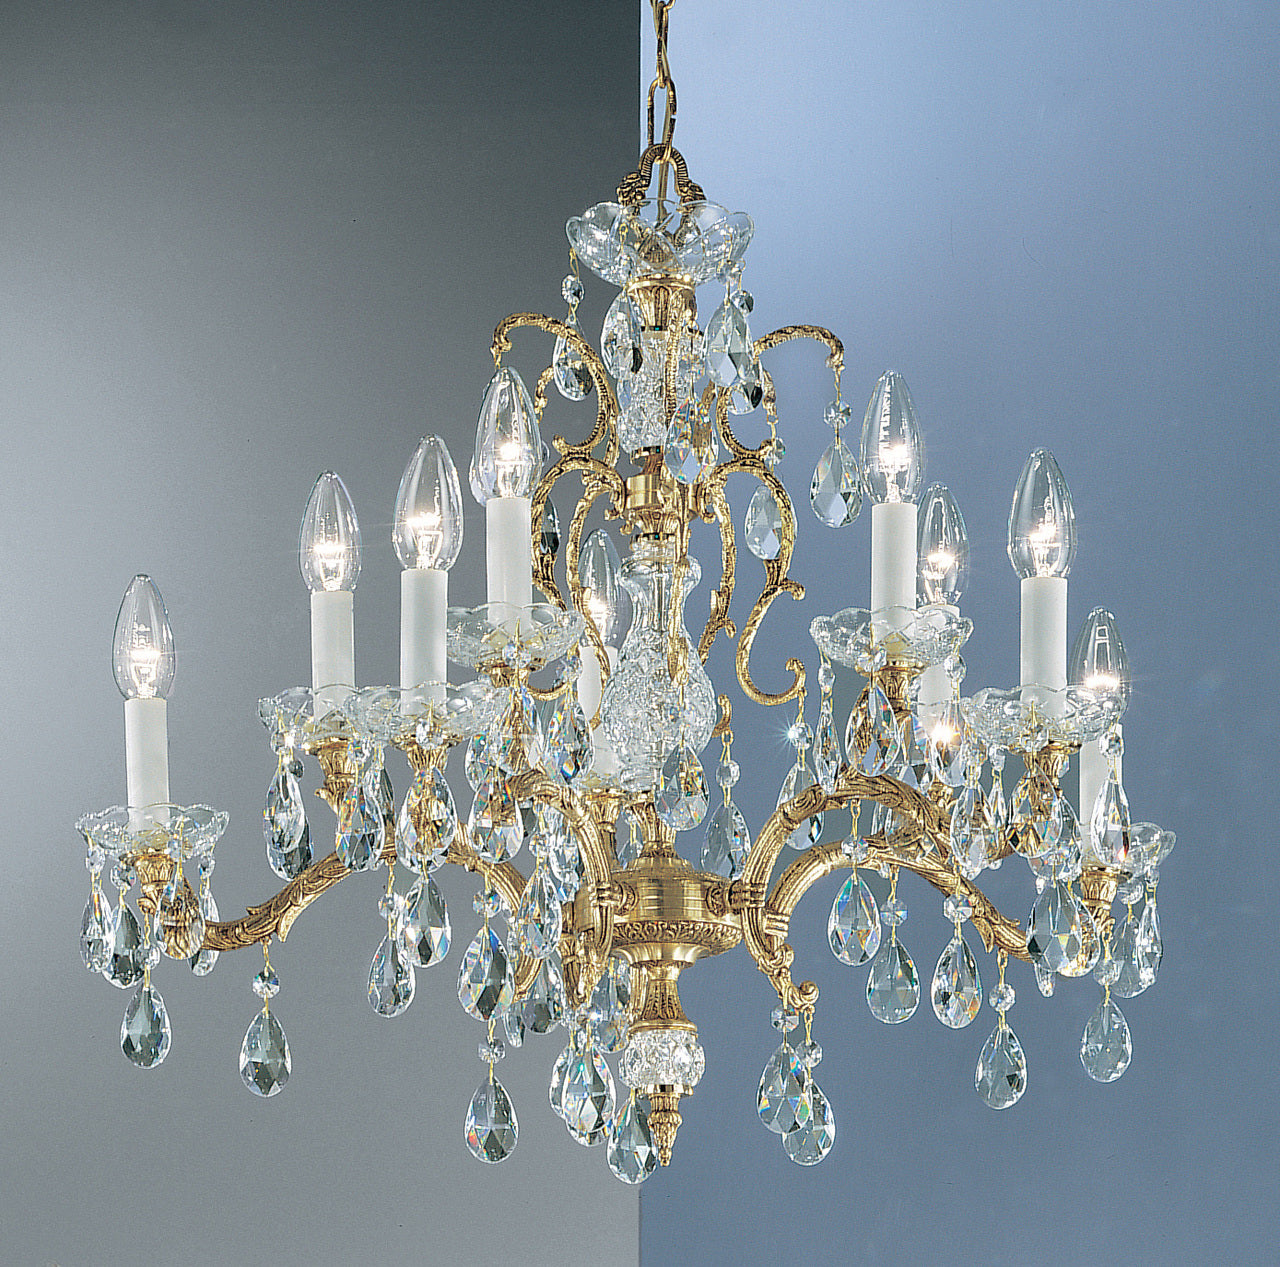 Classic Lighting 5530 OWB PAM Madrid Crystal/Cast Brass Chandelier in Olde World Bronze (Imported from Spain)